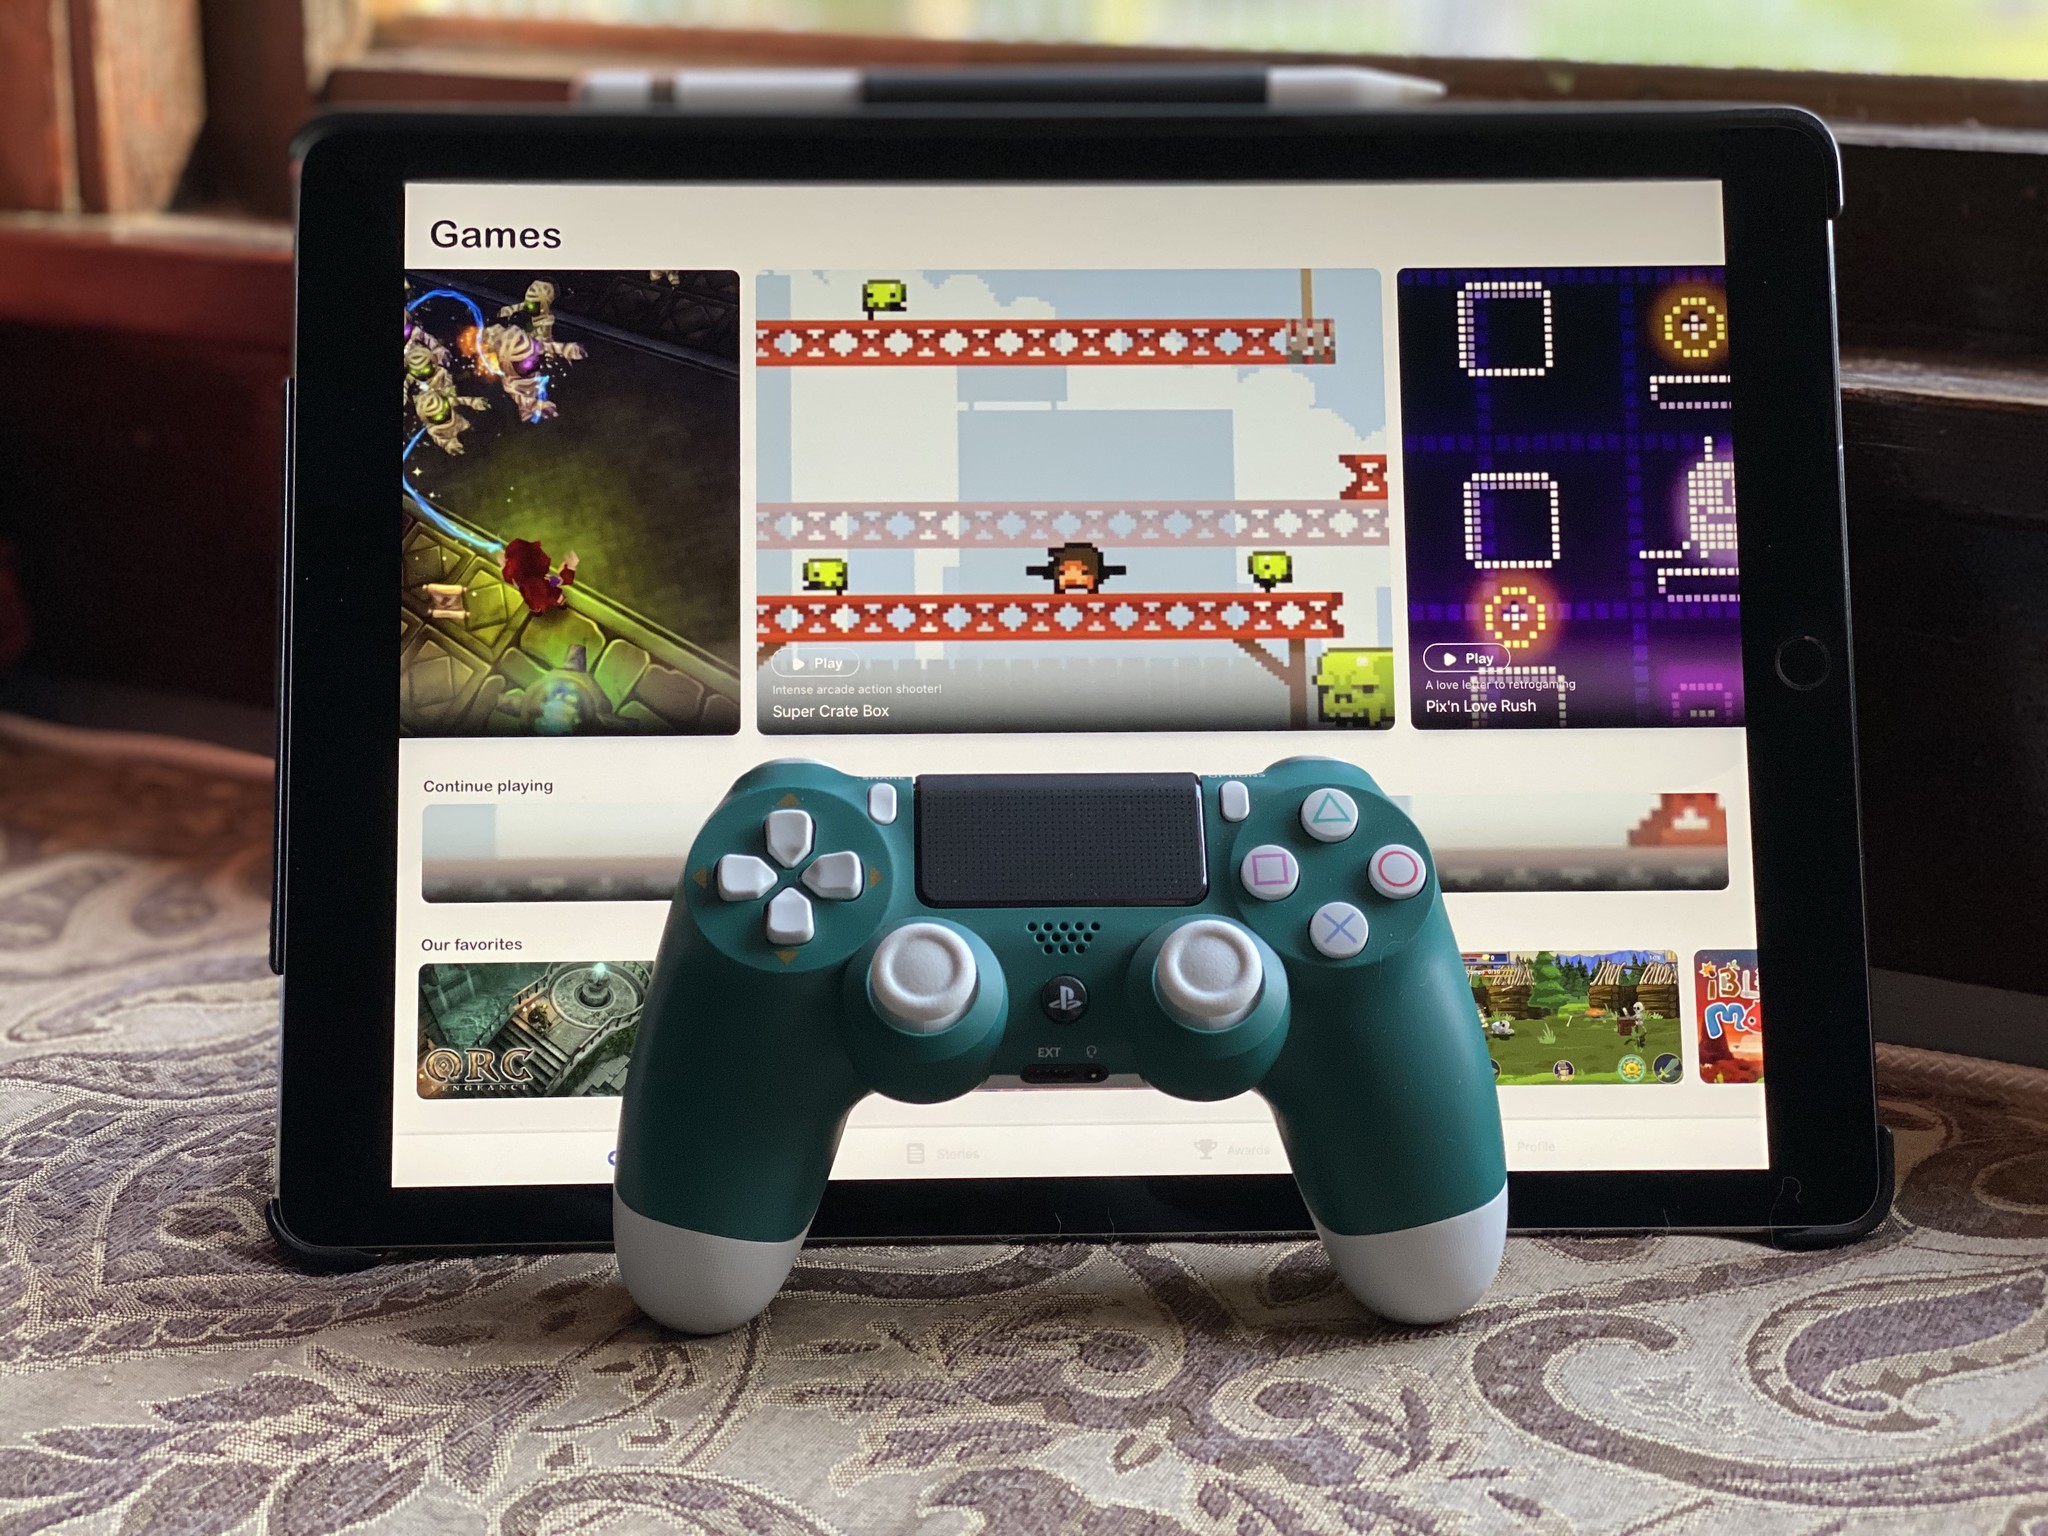 iPad Pro with GameClub and a green DualShock 4 controller